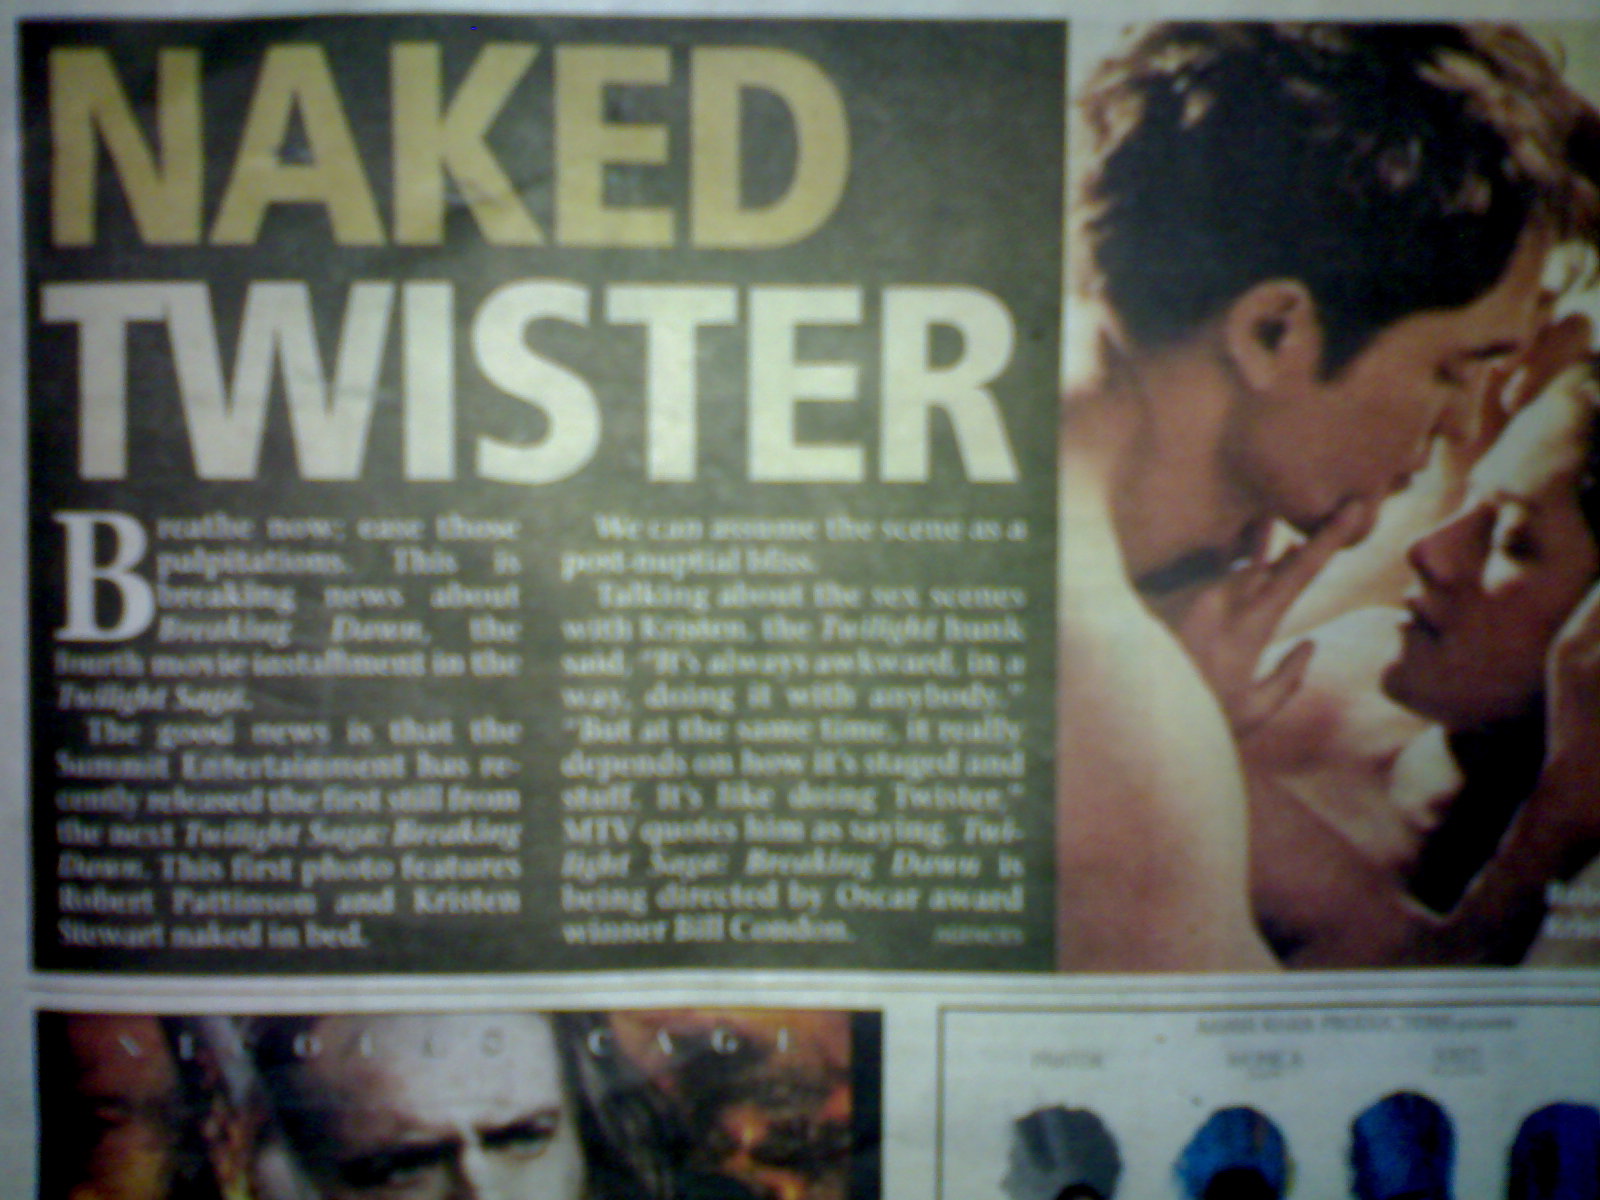 Naked Twister Movie 49